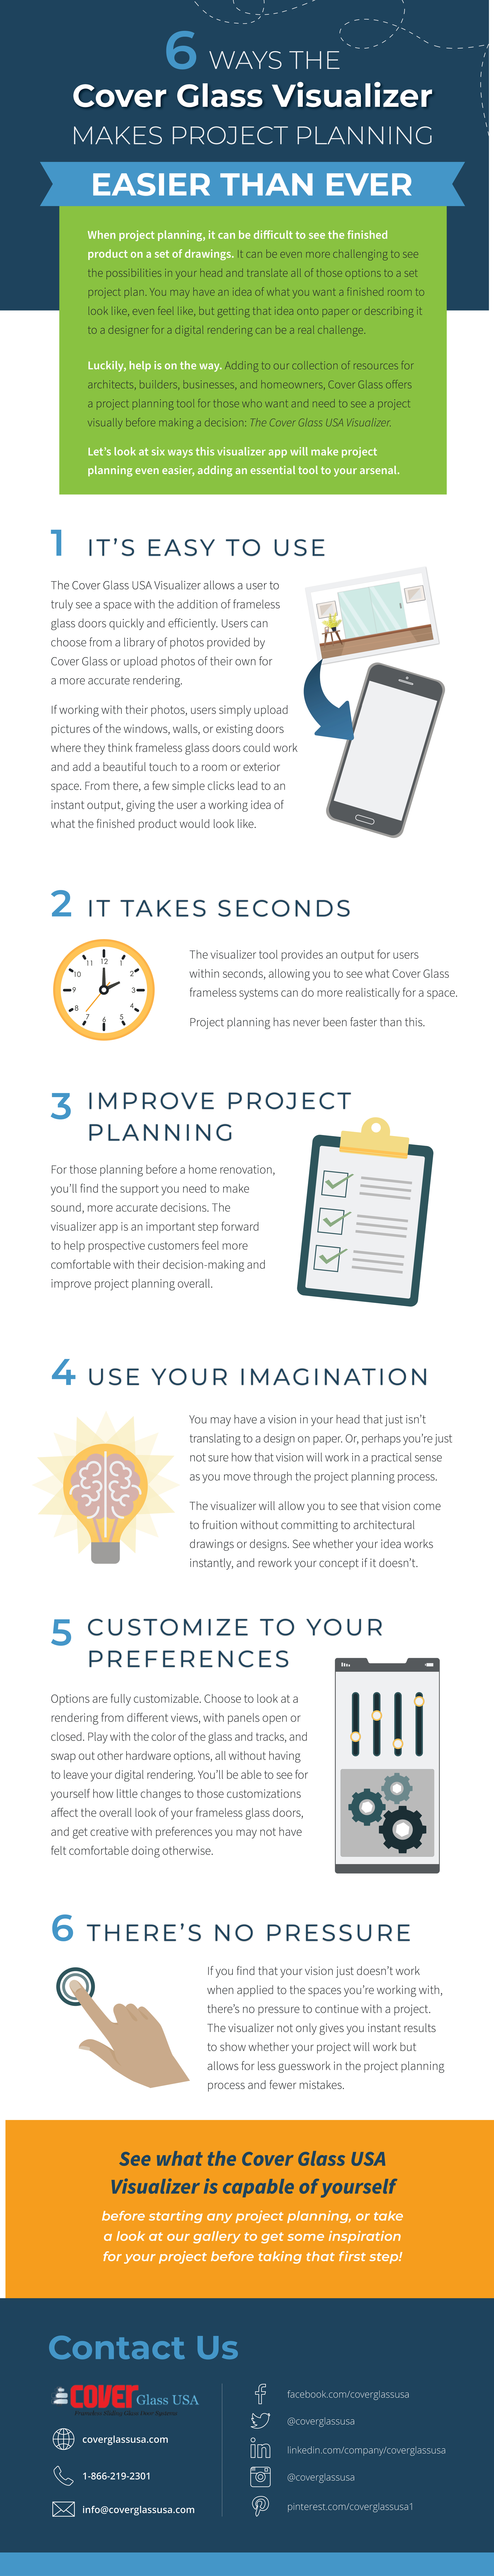 6 ways the Cover Glass visualizer makes project planning easier than ever - infographic